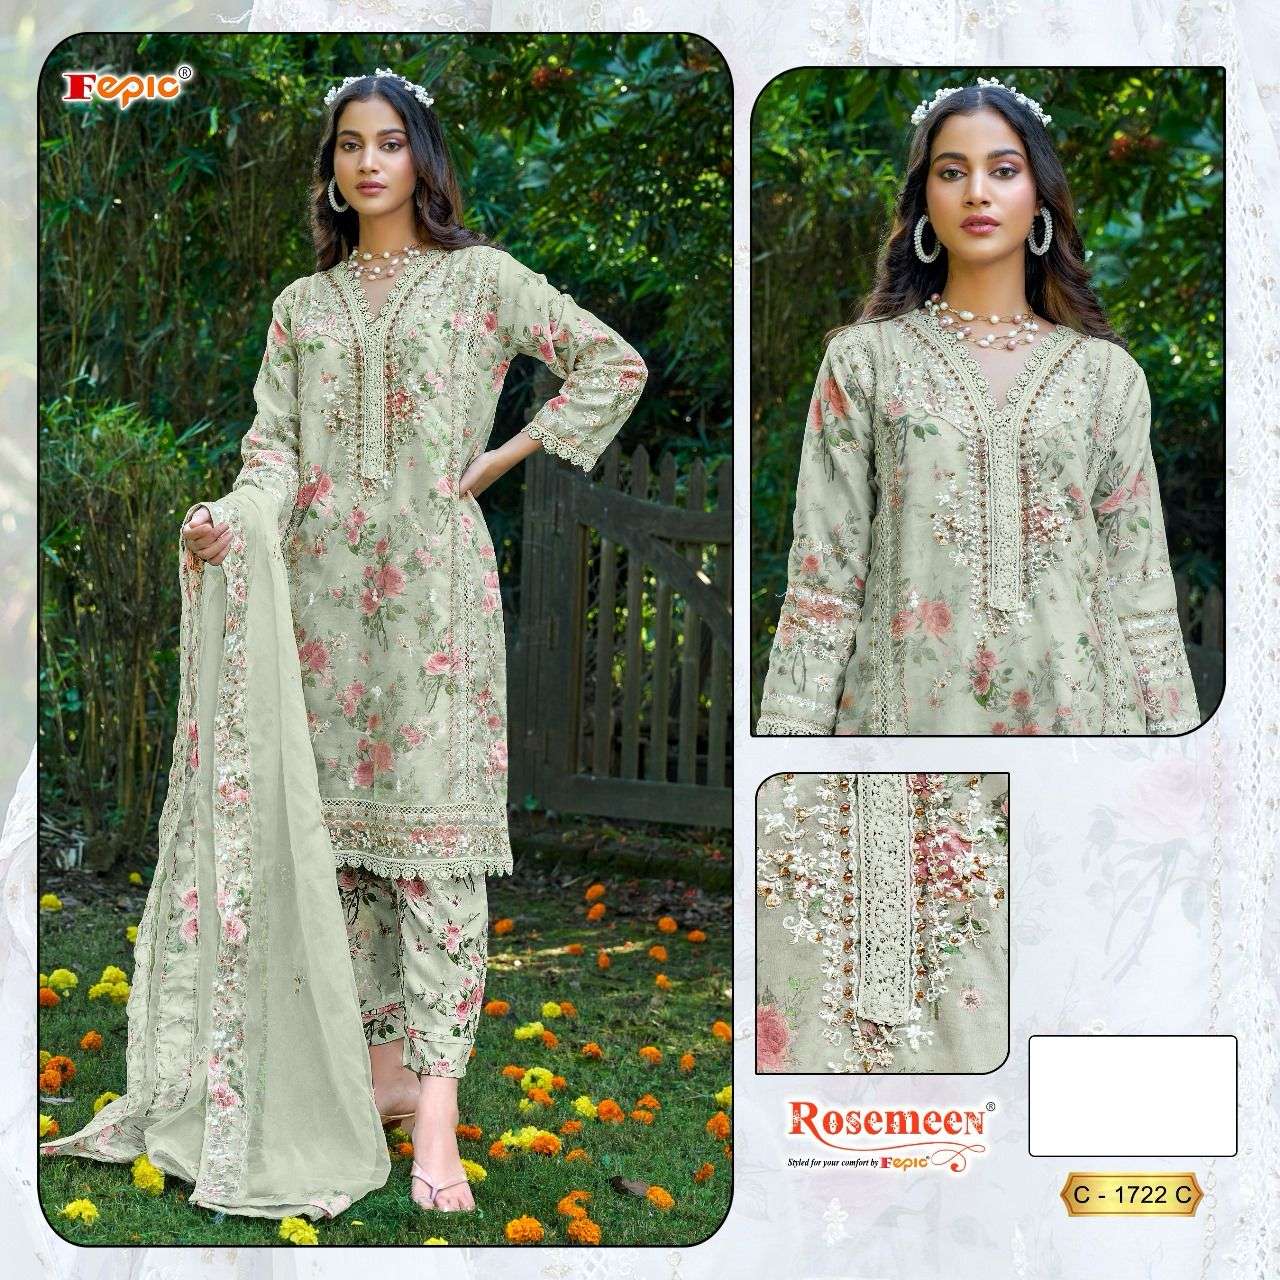 Fepic Rosemeen 1722 Organza With Embroidery work Pakistani s...